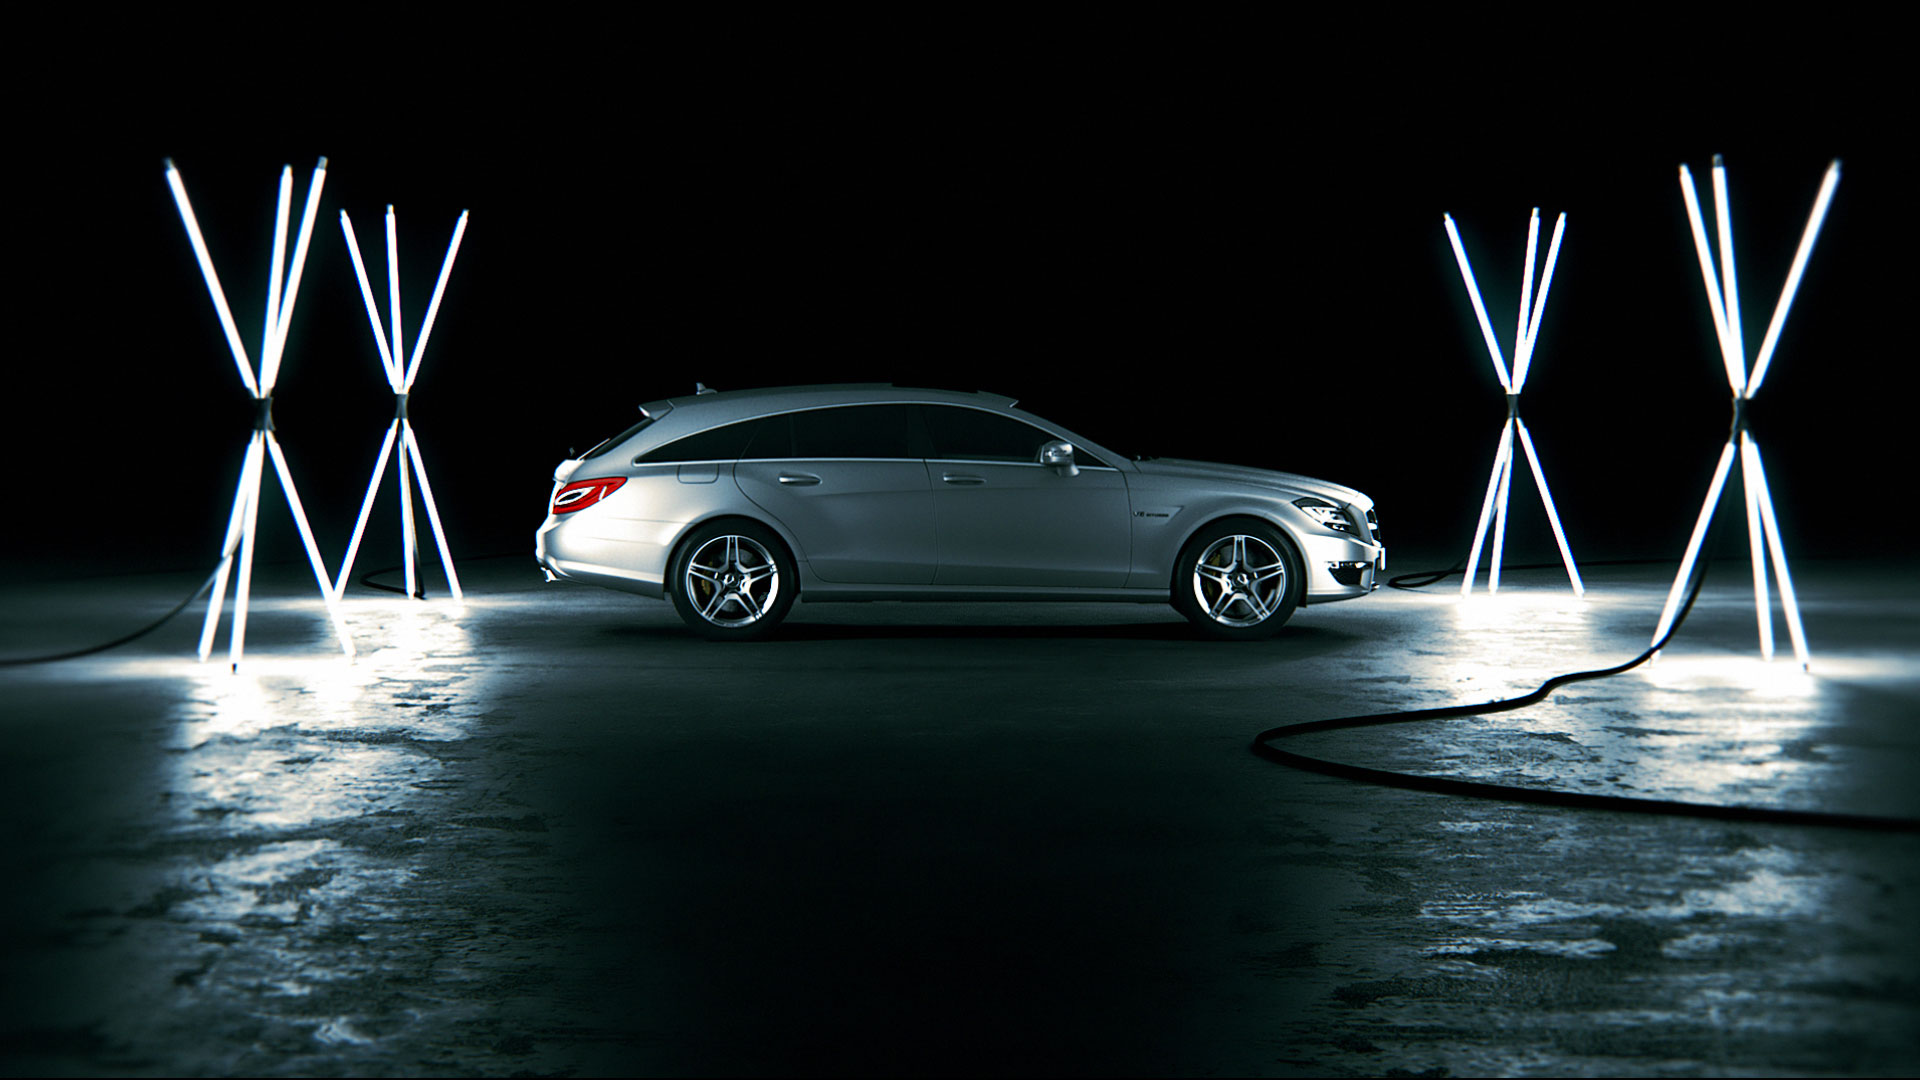 Sideview Mercedes-Benz CLS promotion movie.